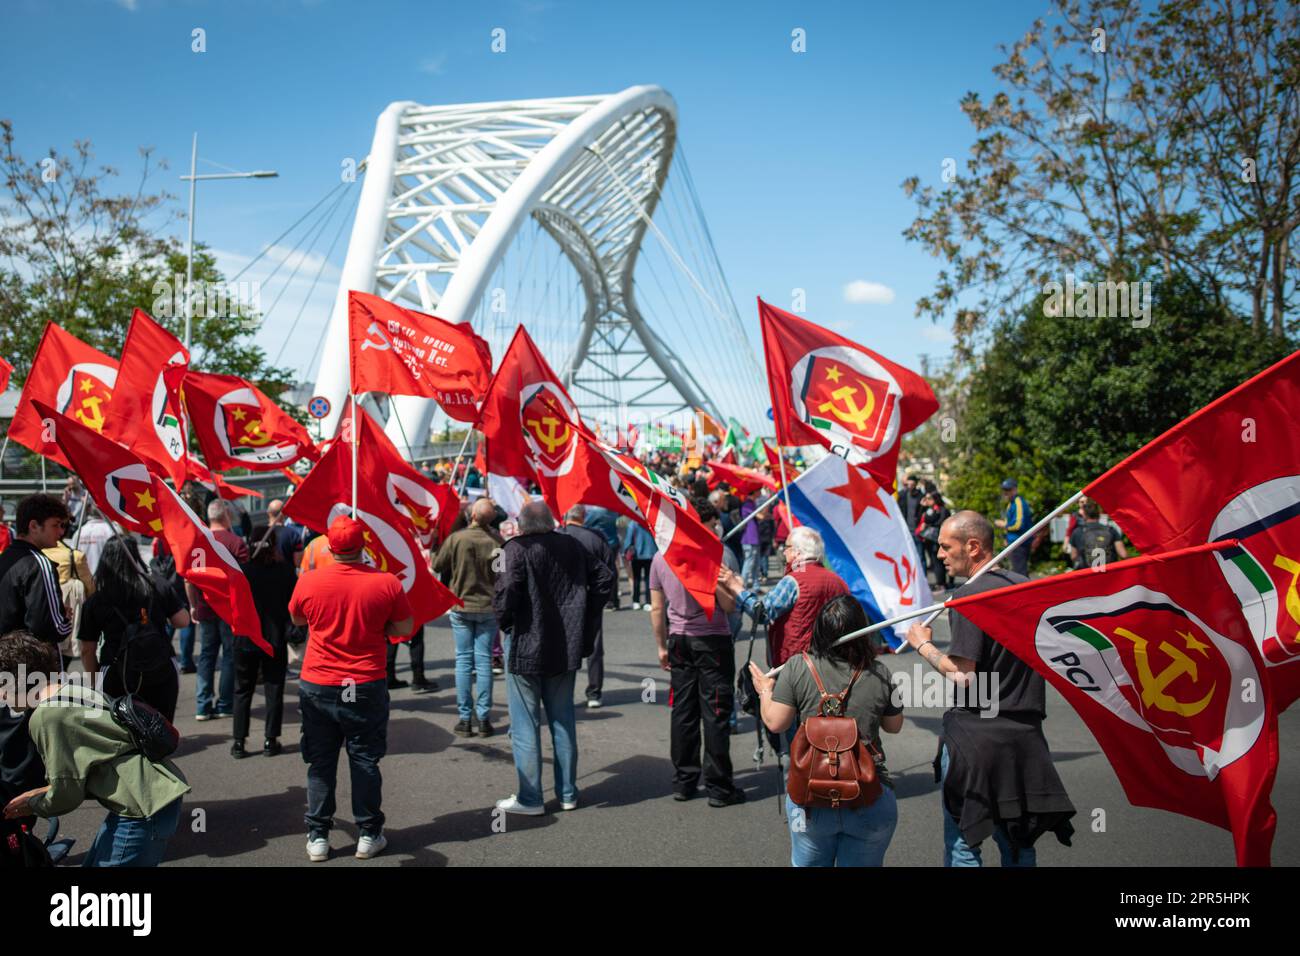 Protesters wave the red flags of the Italian Communist Party before crossing the Settimia Spizzichino bridge during the demonstration. About 10 thousand demonstrators took part during the parade organized by the ANPI (National Association of Partisans of Italy) in Rome on the occasion of the 78th anniversary of the Liberation from Nazi-fascism. Starting from Largo Bompiani, they crossed the neighborhoods of Tor Marancia, Garbatella and Ostiense, until they arrived at Porta San Paolo. The demonstration ended in Piazzale Ostiense with speeches by political figures, trade unions and the testimoni Stock Photo